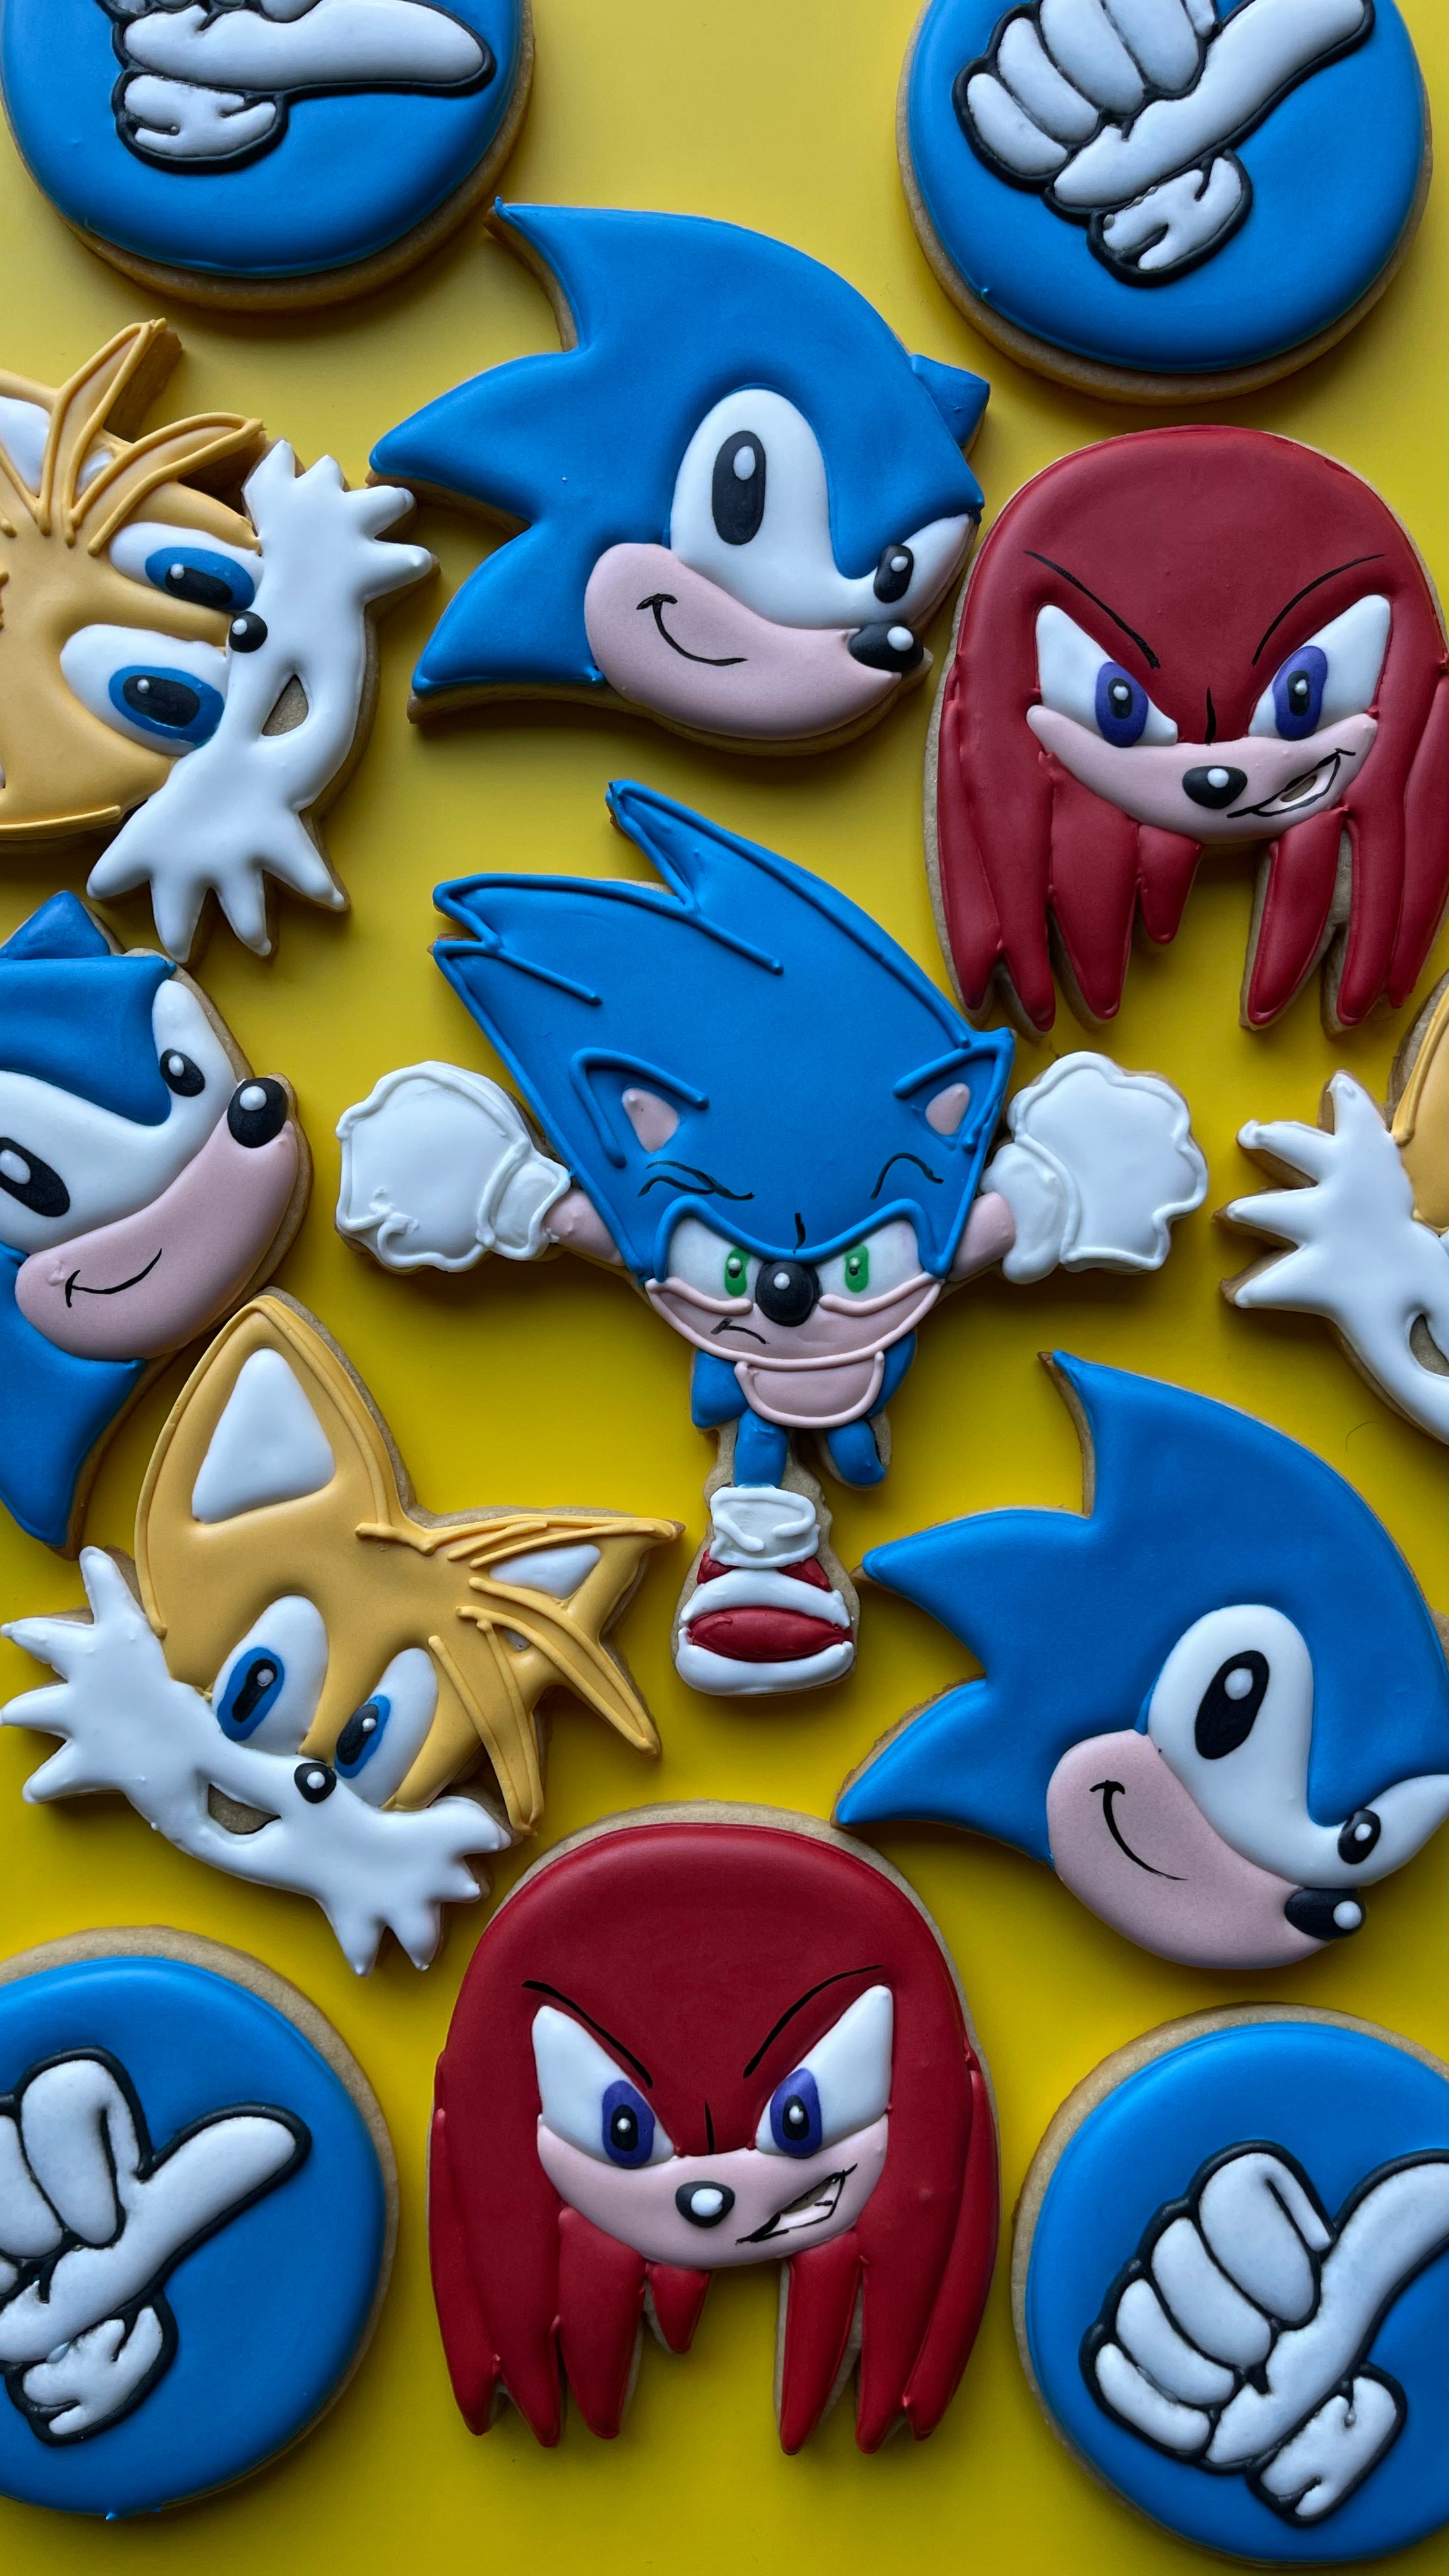 Tails from Sonic The Hedgehog face 3.5  inch cookie cutter